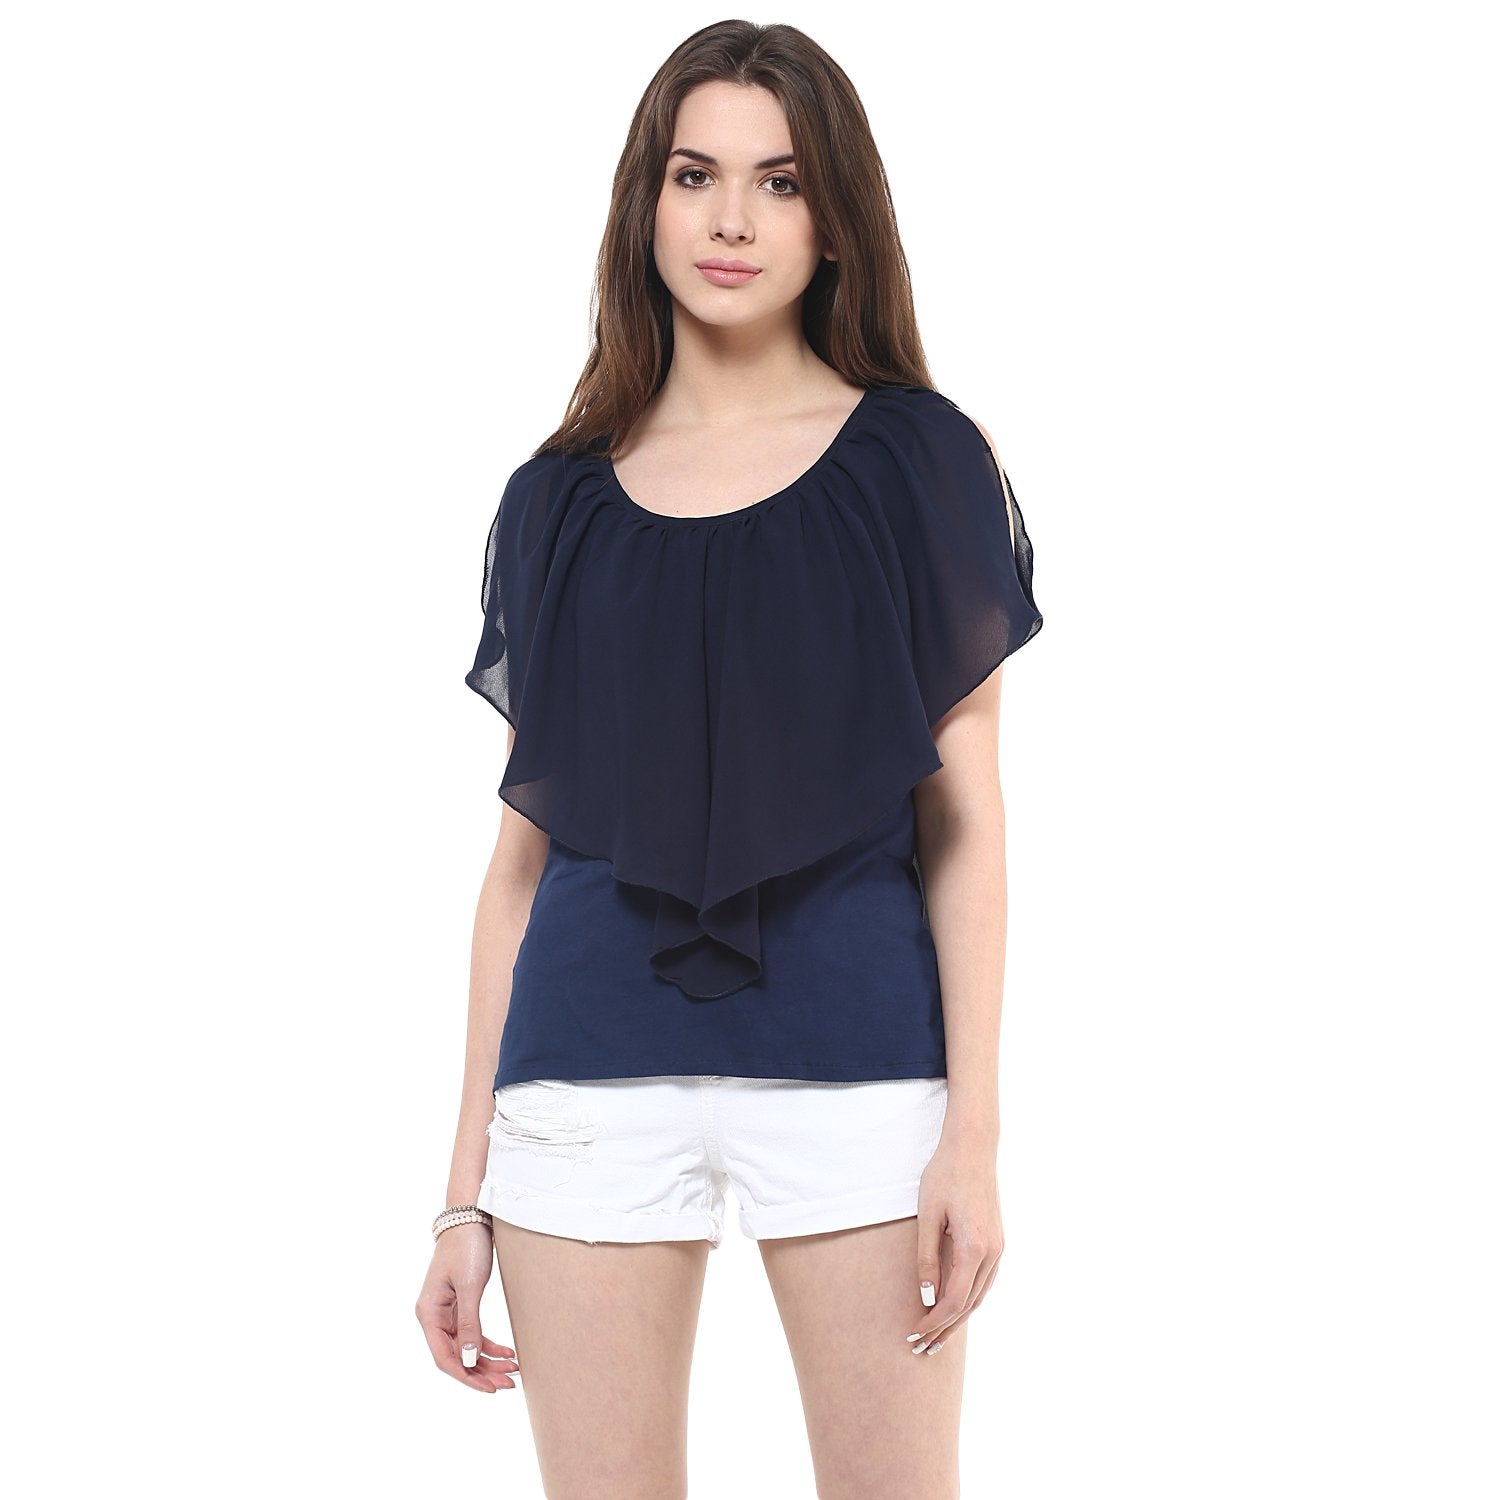 Women's Solid Flared Jersey Top - Pannkh